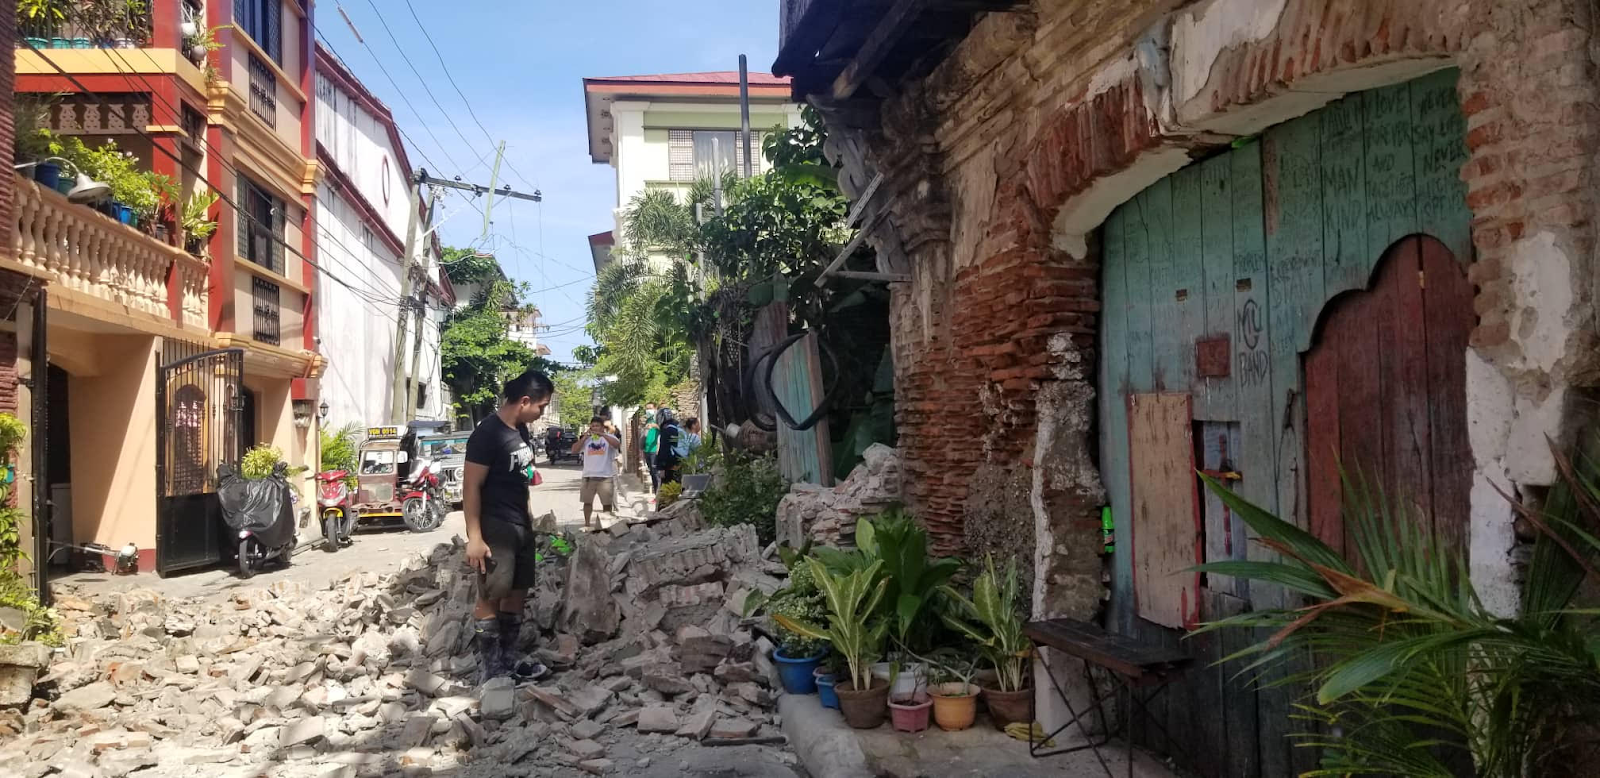 DepEd urged to suspend in-school activities in quake-hit areas